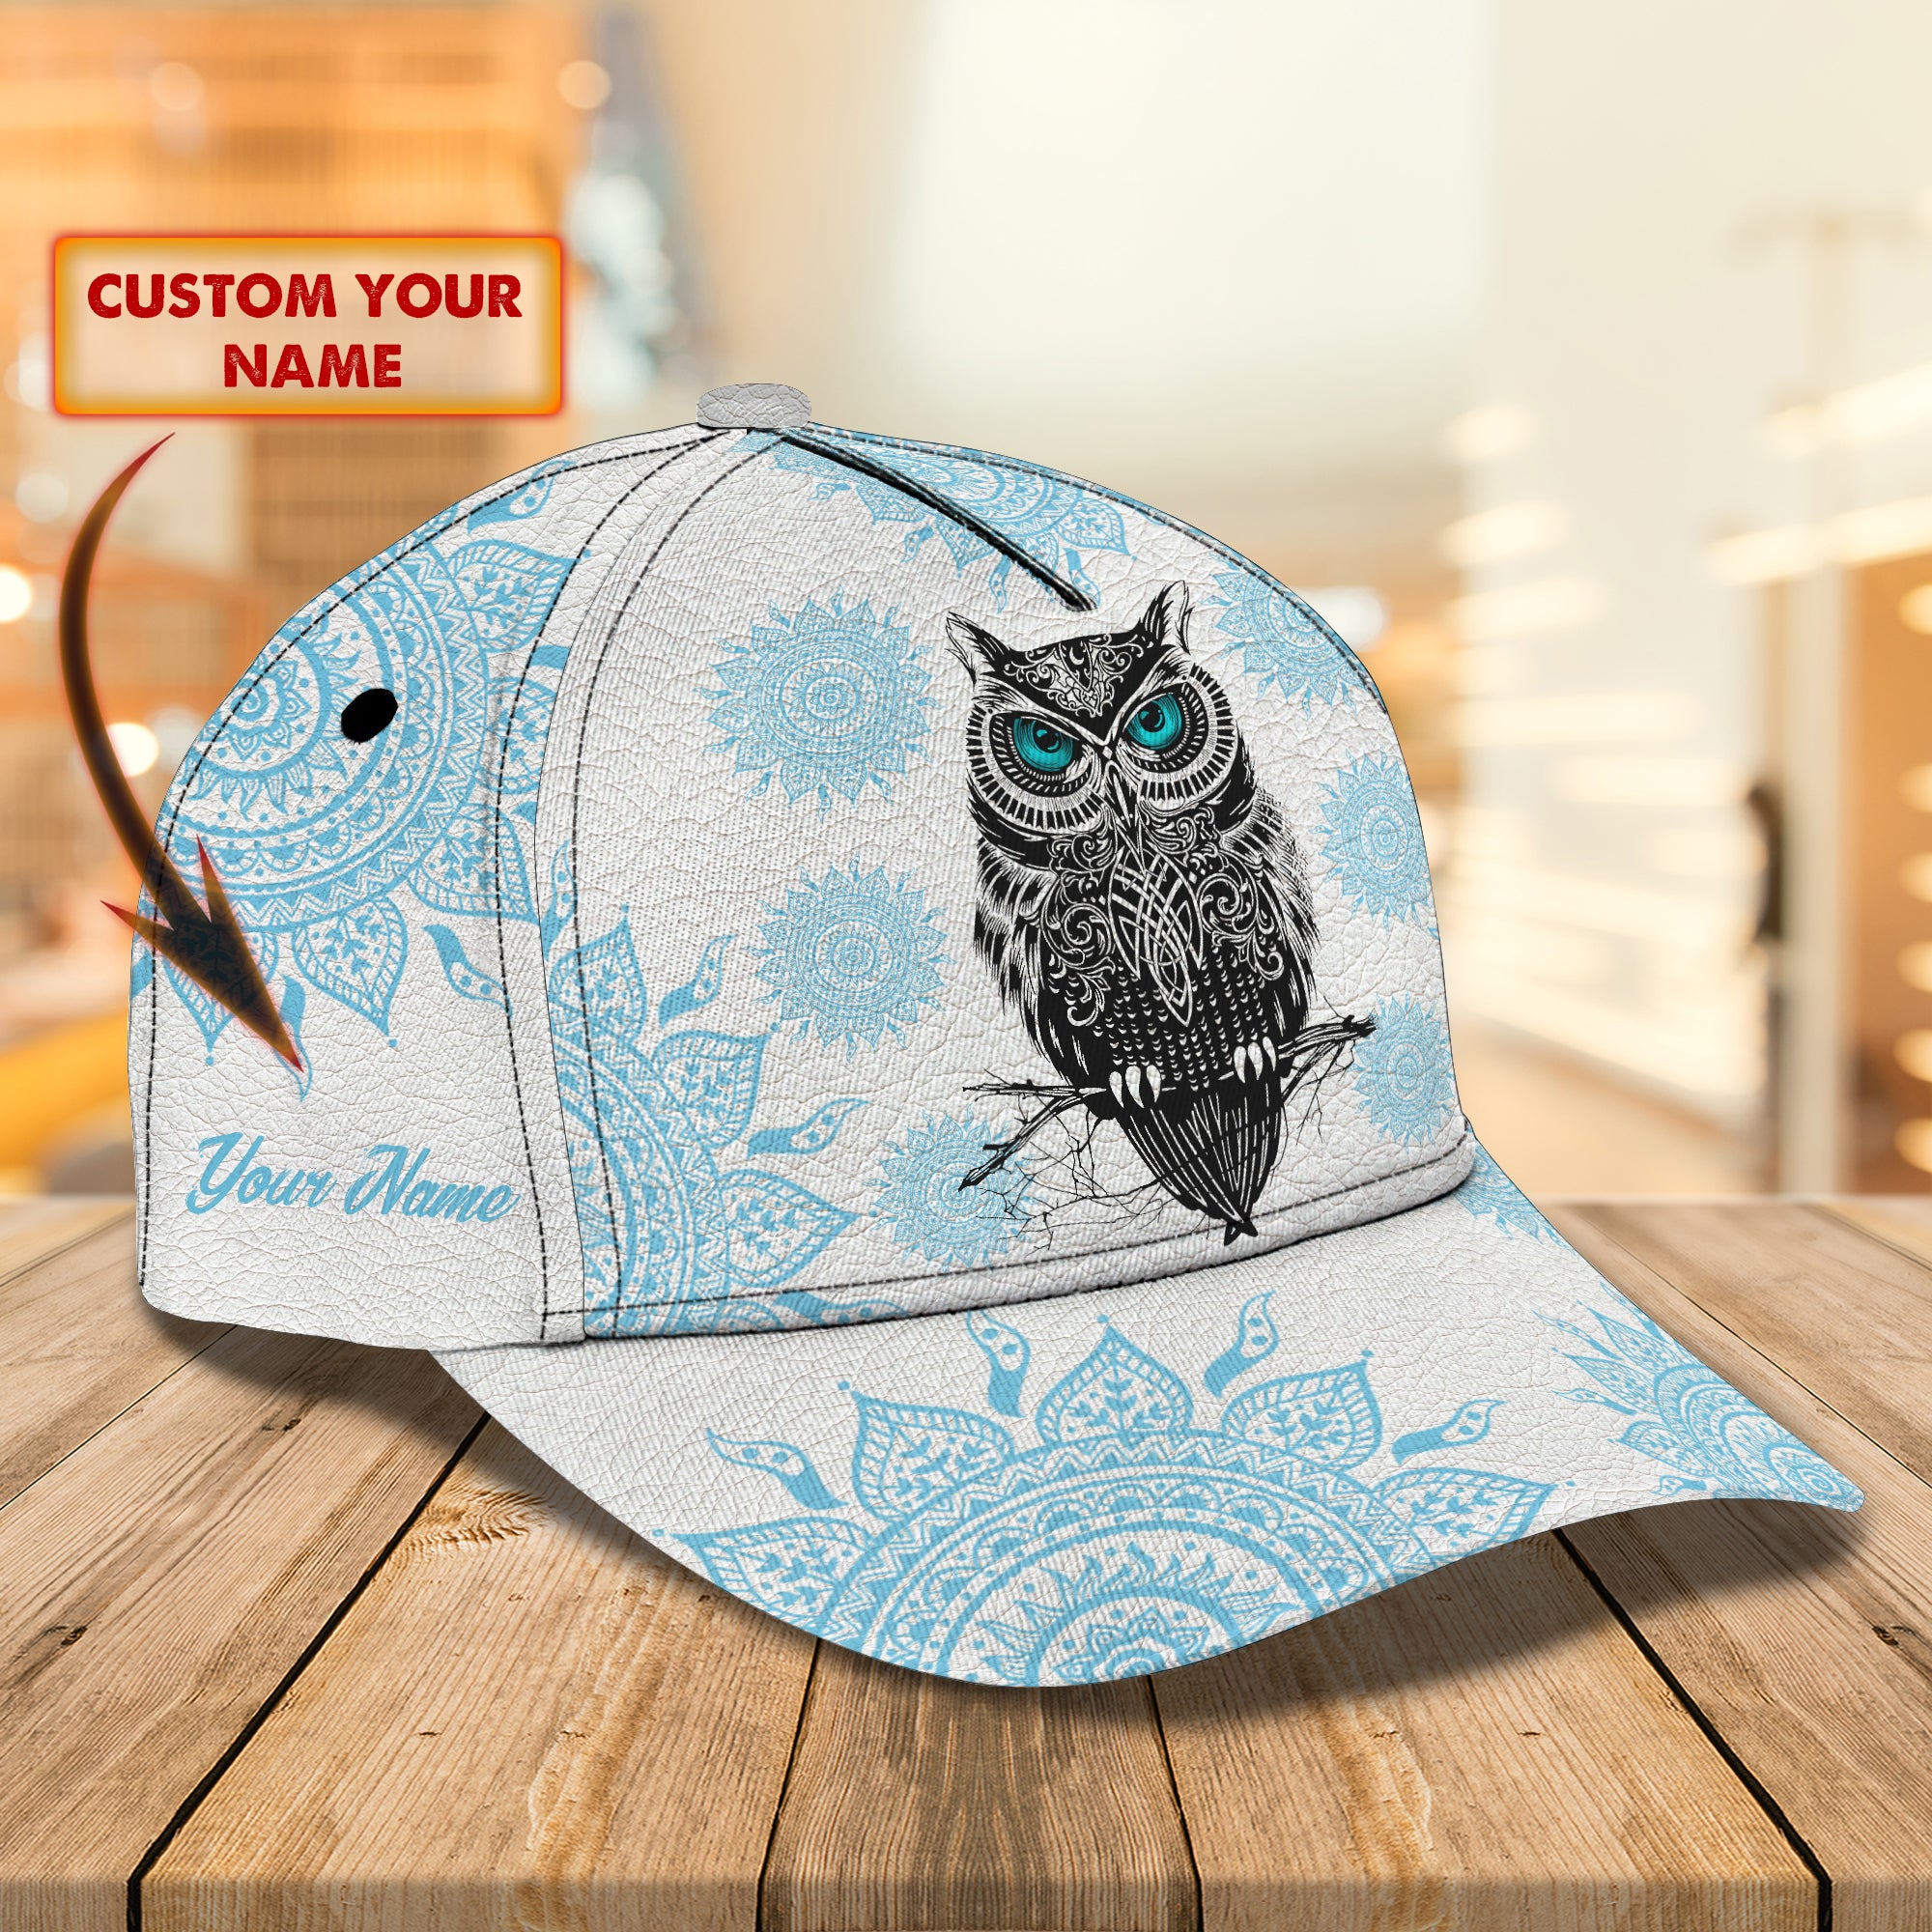 OWL1 - Personalized Name Cap - BY97